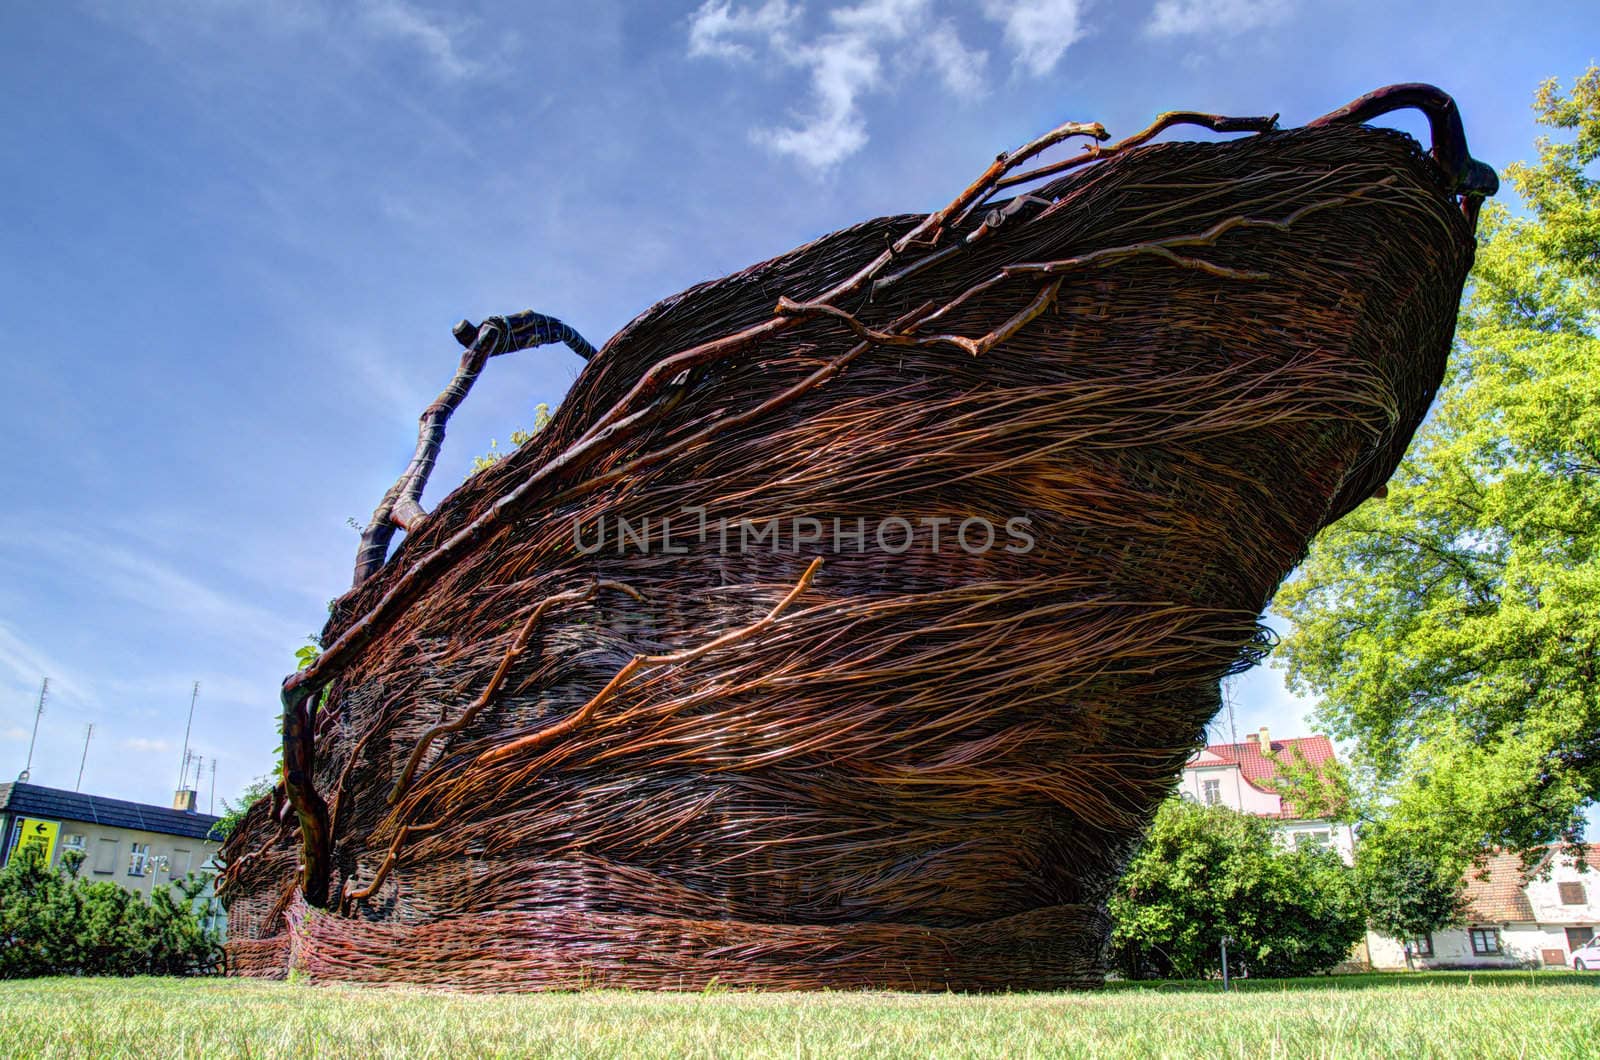 This photo present the world's largest wicker basket in Nowy Tomyśl in Poland. Achieving entered the record books HDR.